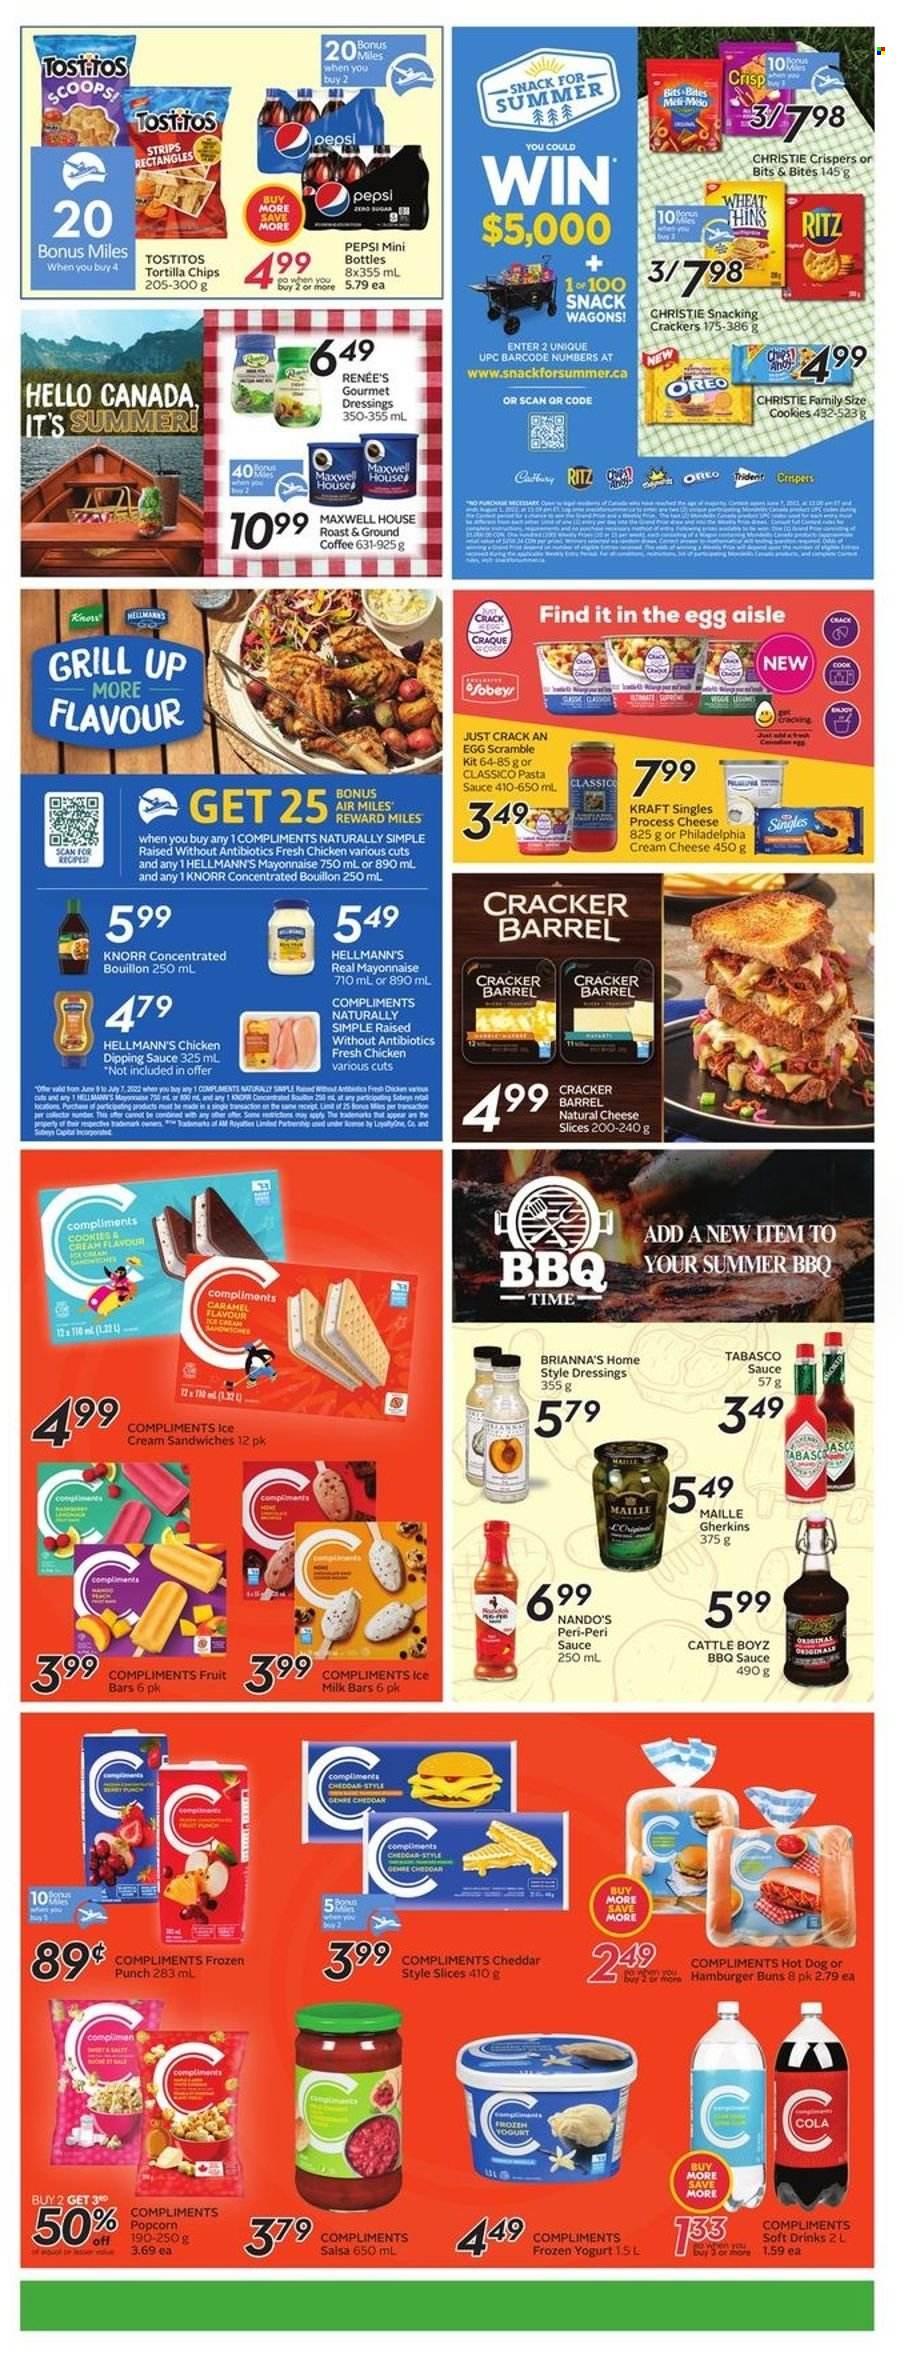 thumbnail - Sobeys Flyer - June 30, 2022 - July 06, 2022 - Sales products - buns, burger buns, hot dog, pasta sauce, sauce, Kraft®, cream cheese, sandwich slices, sliced cheese, cheese, Kraft Singles, yoghurt, milk, mayonnaise, Hellmann’s, ice cream, ice cream sandwich, strips, cookies, snack, crackers, Cadbury, Trident, RITZ, tortilla chips, Thins, popcorn, Tostitos, bouillon, tabasco, BBQ sauce, caramel, salsa, Classico, Pepsi, soft drink, Maxwell House, coffee, ground coffee, punch, grill, Philadelphia, Oreo, Knorr. Page 14.